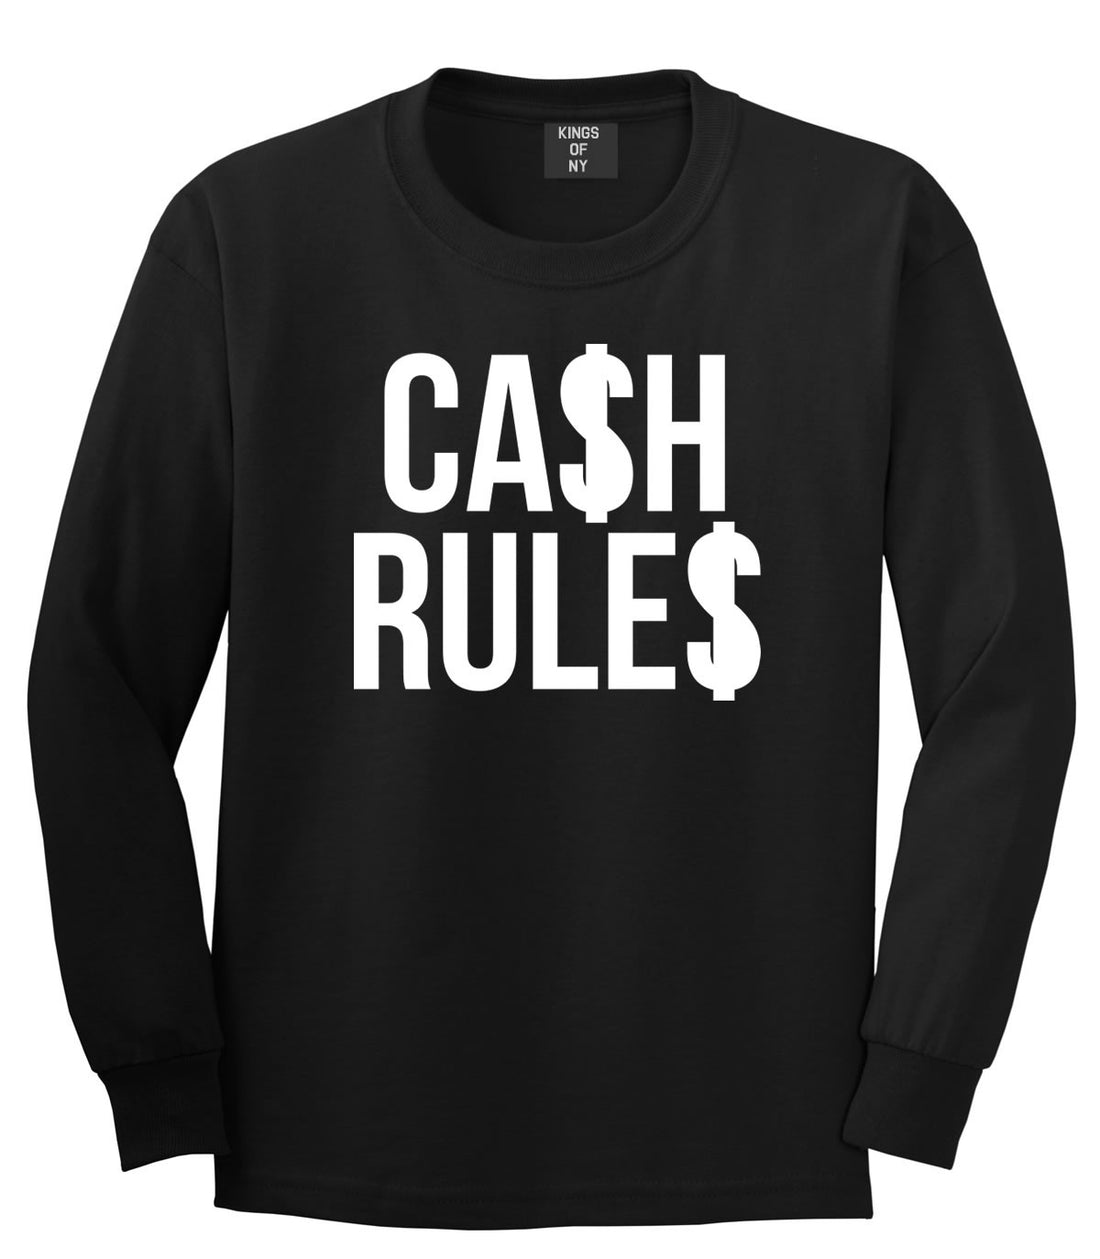 Cash Rules Long Sleeve T-Shirt in Black by Kings Of NY